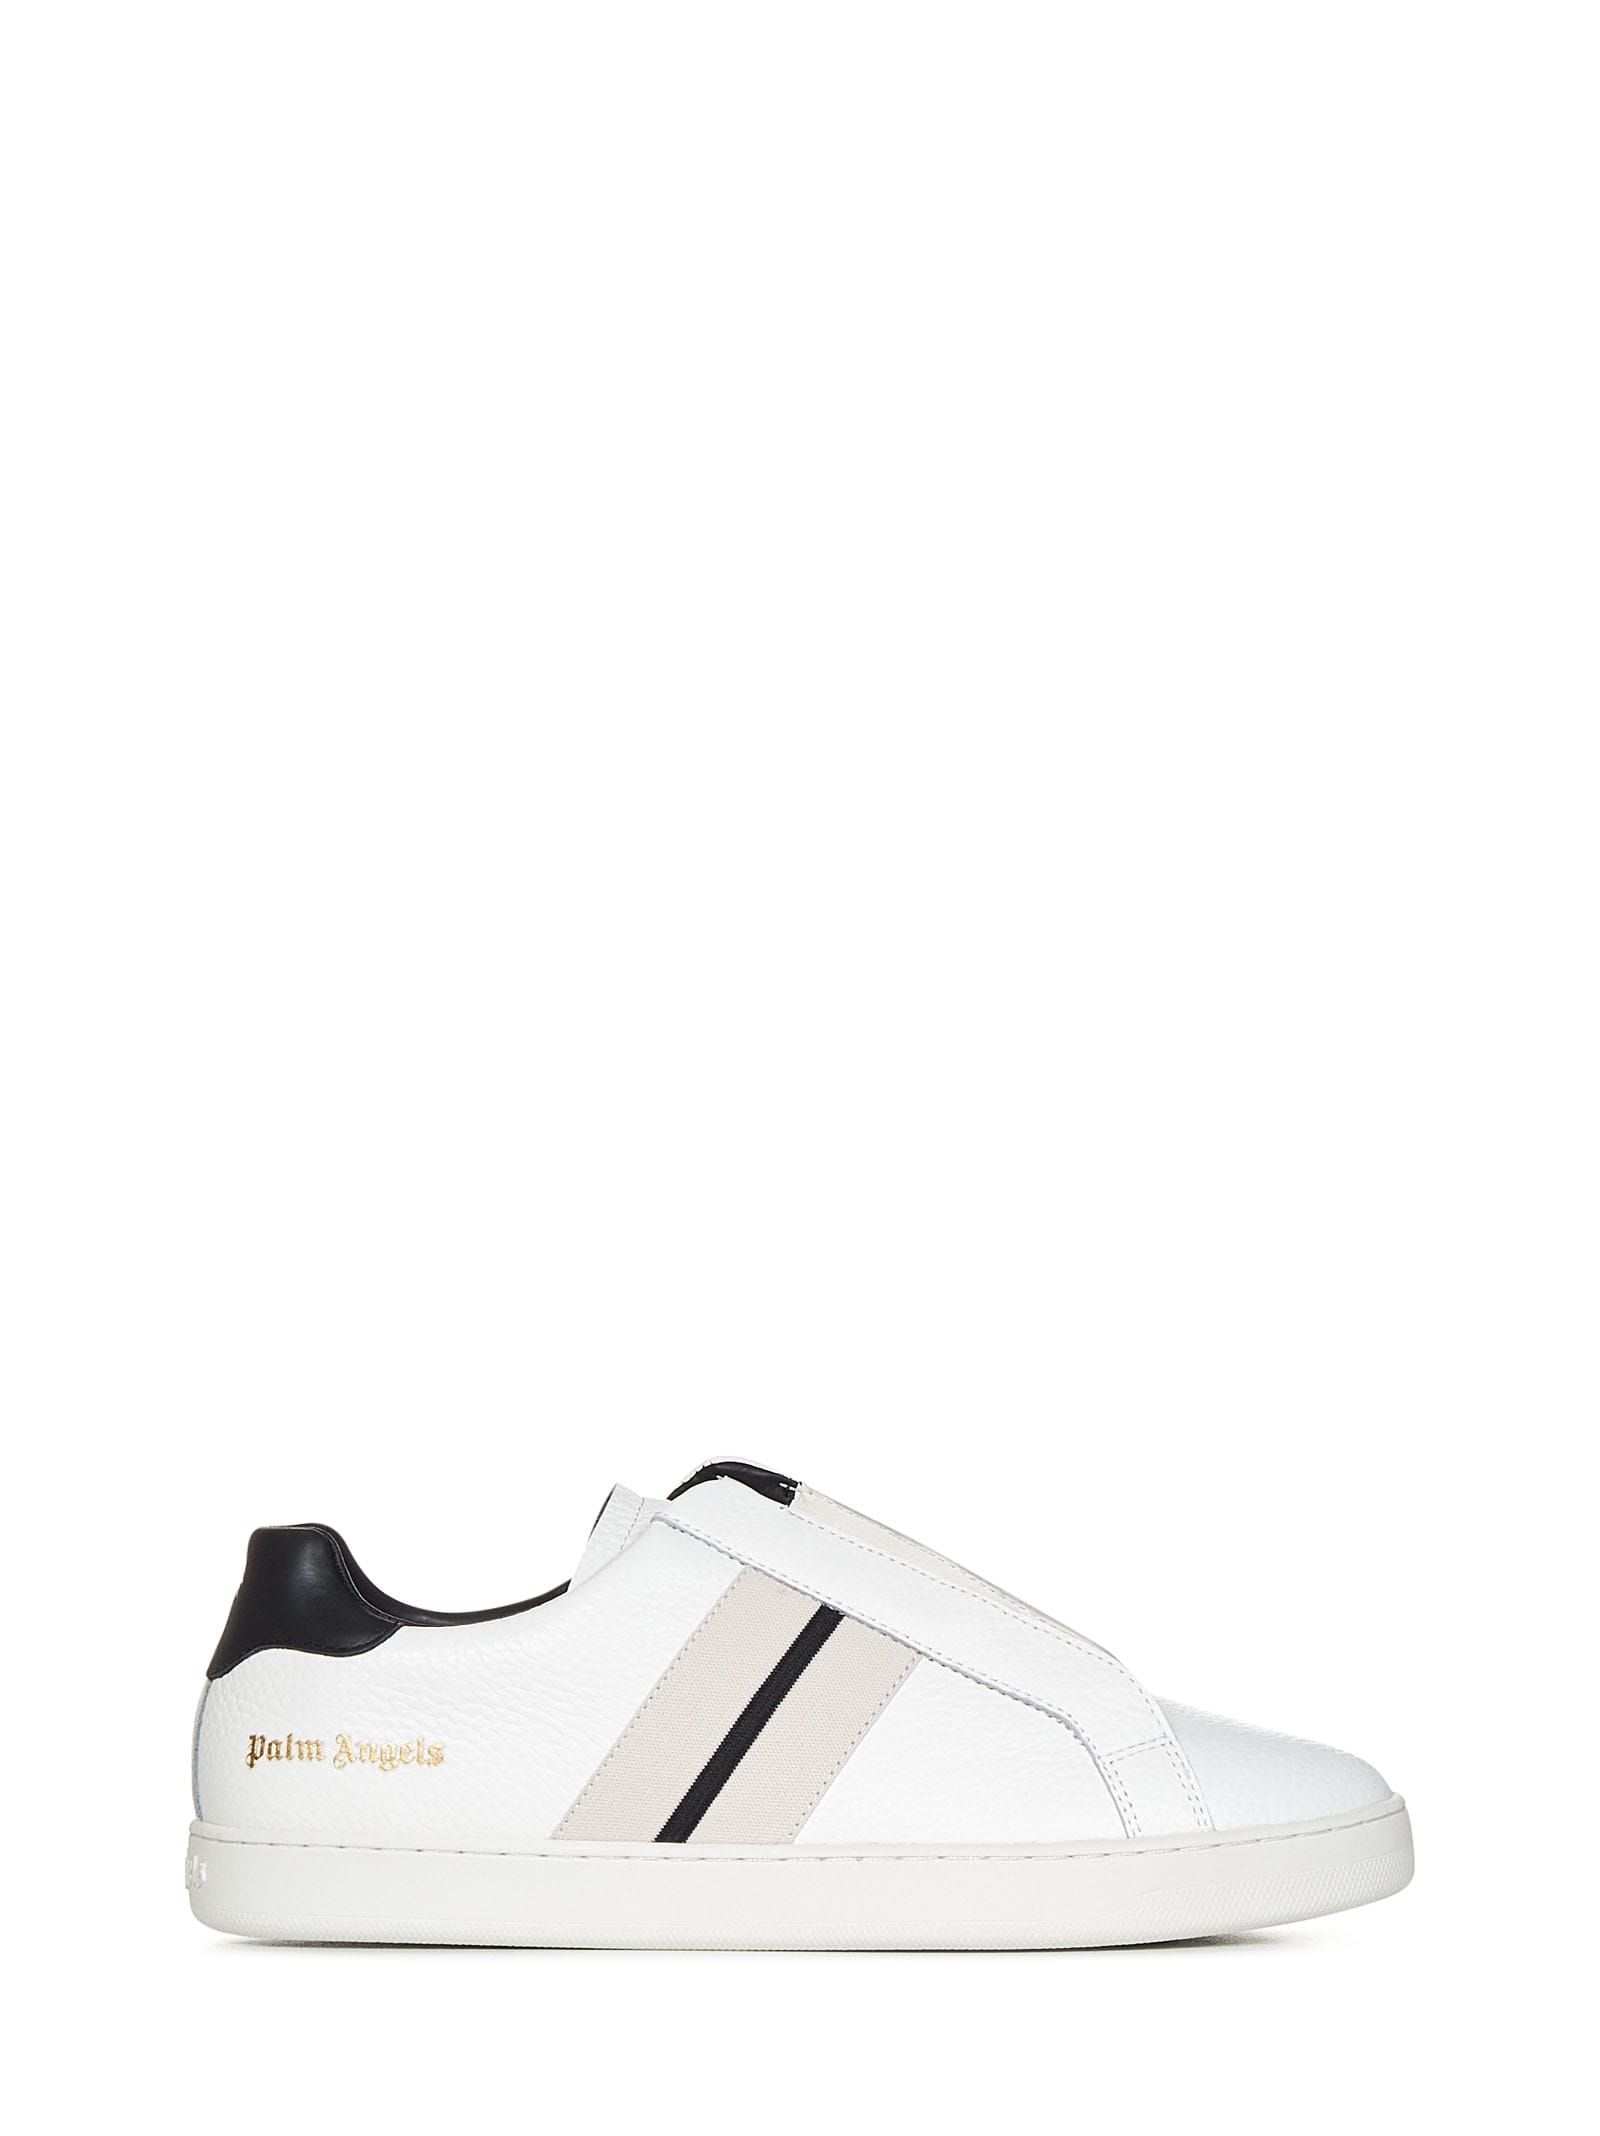 PALM ANGELS TRACK PALM 1 SNEAKERS